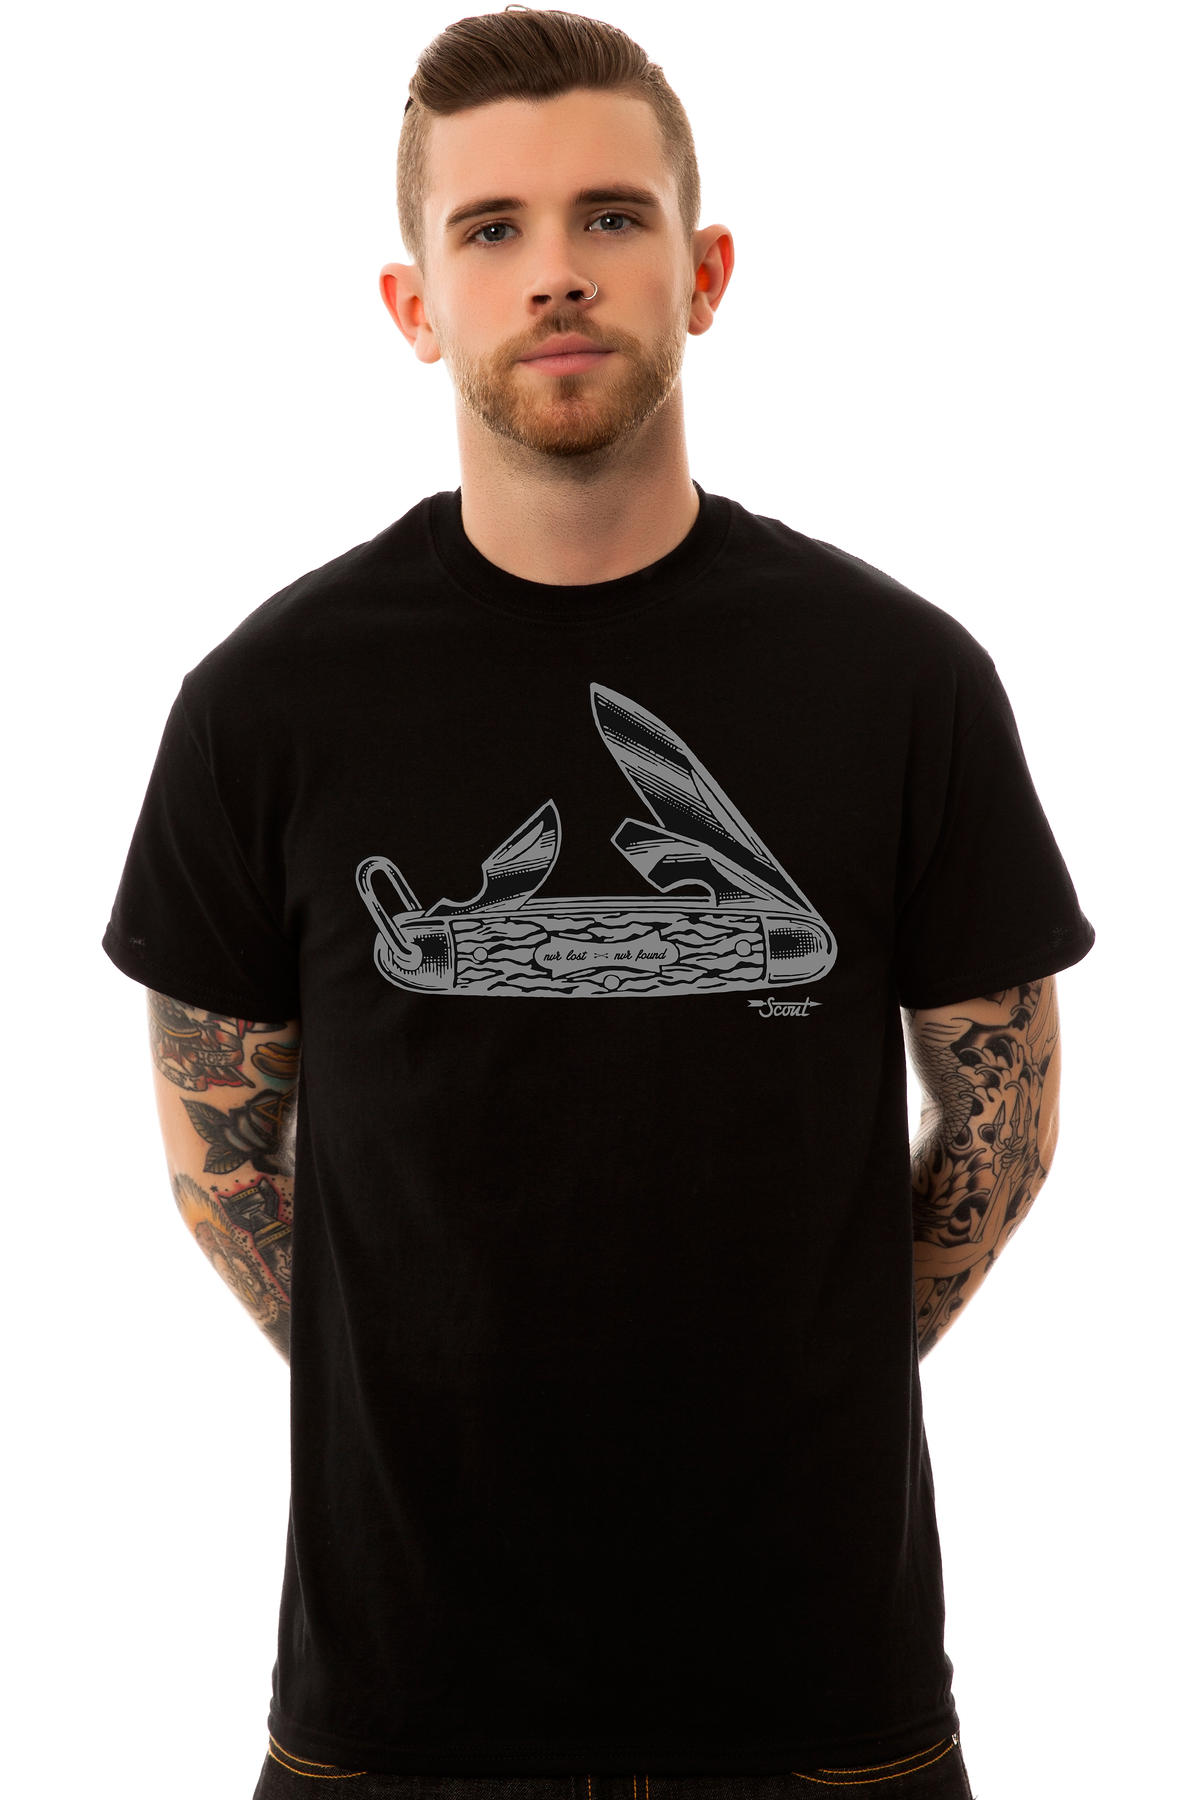 The Army Knife Tee in Black